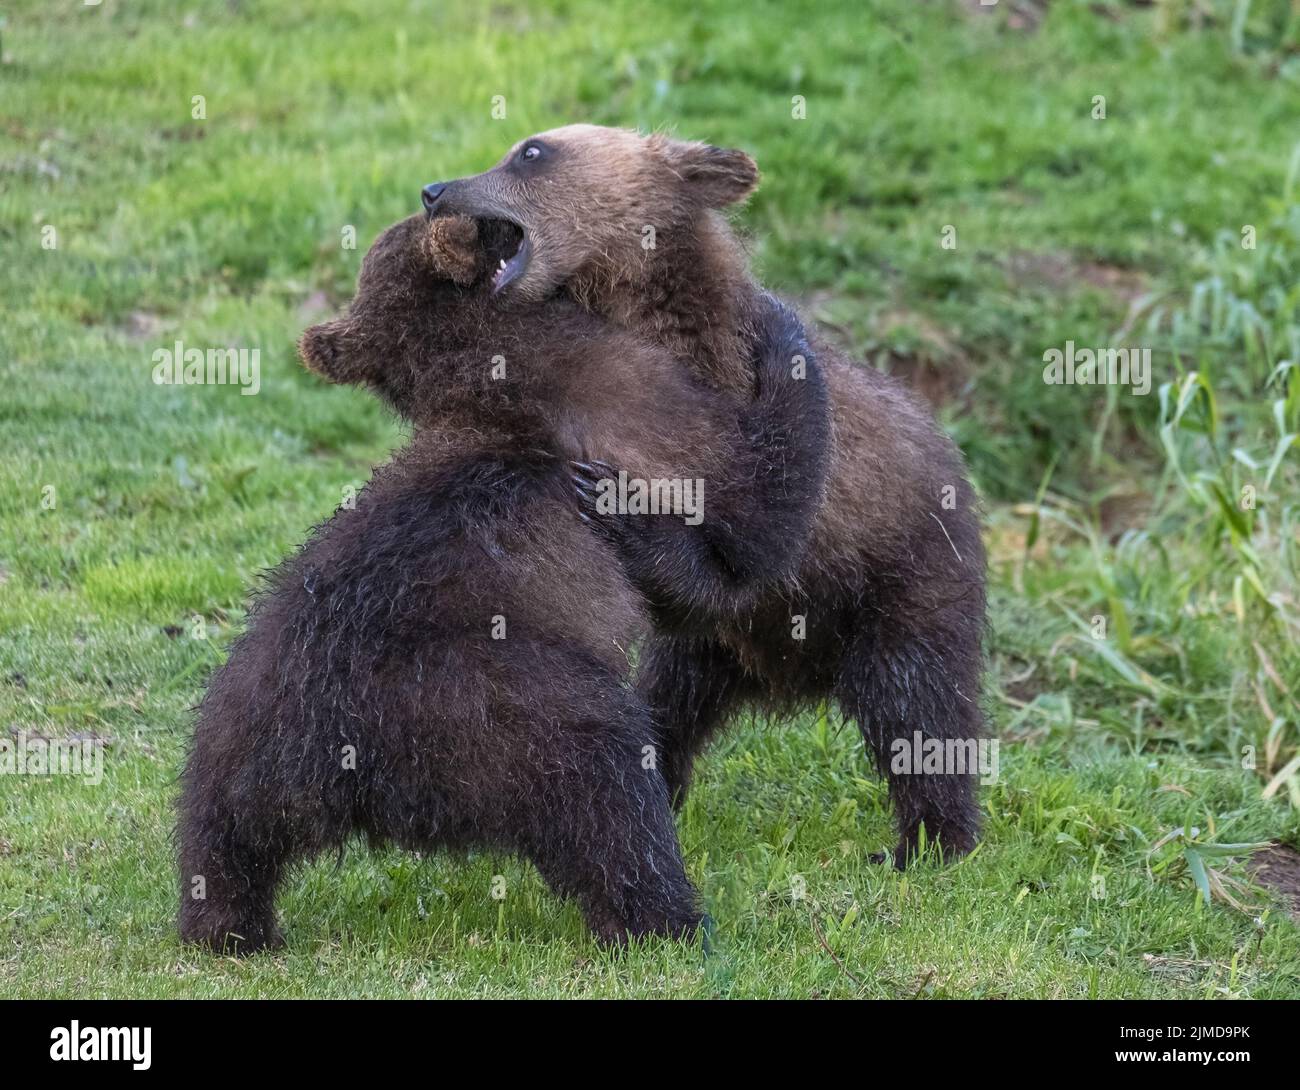 Two brown bear cubs playing Stock Photo